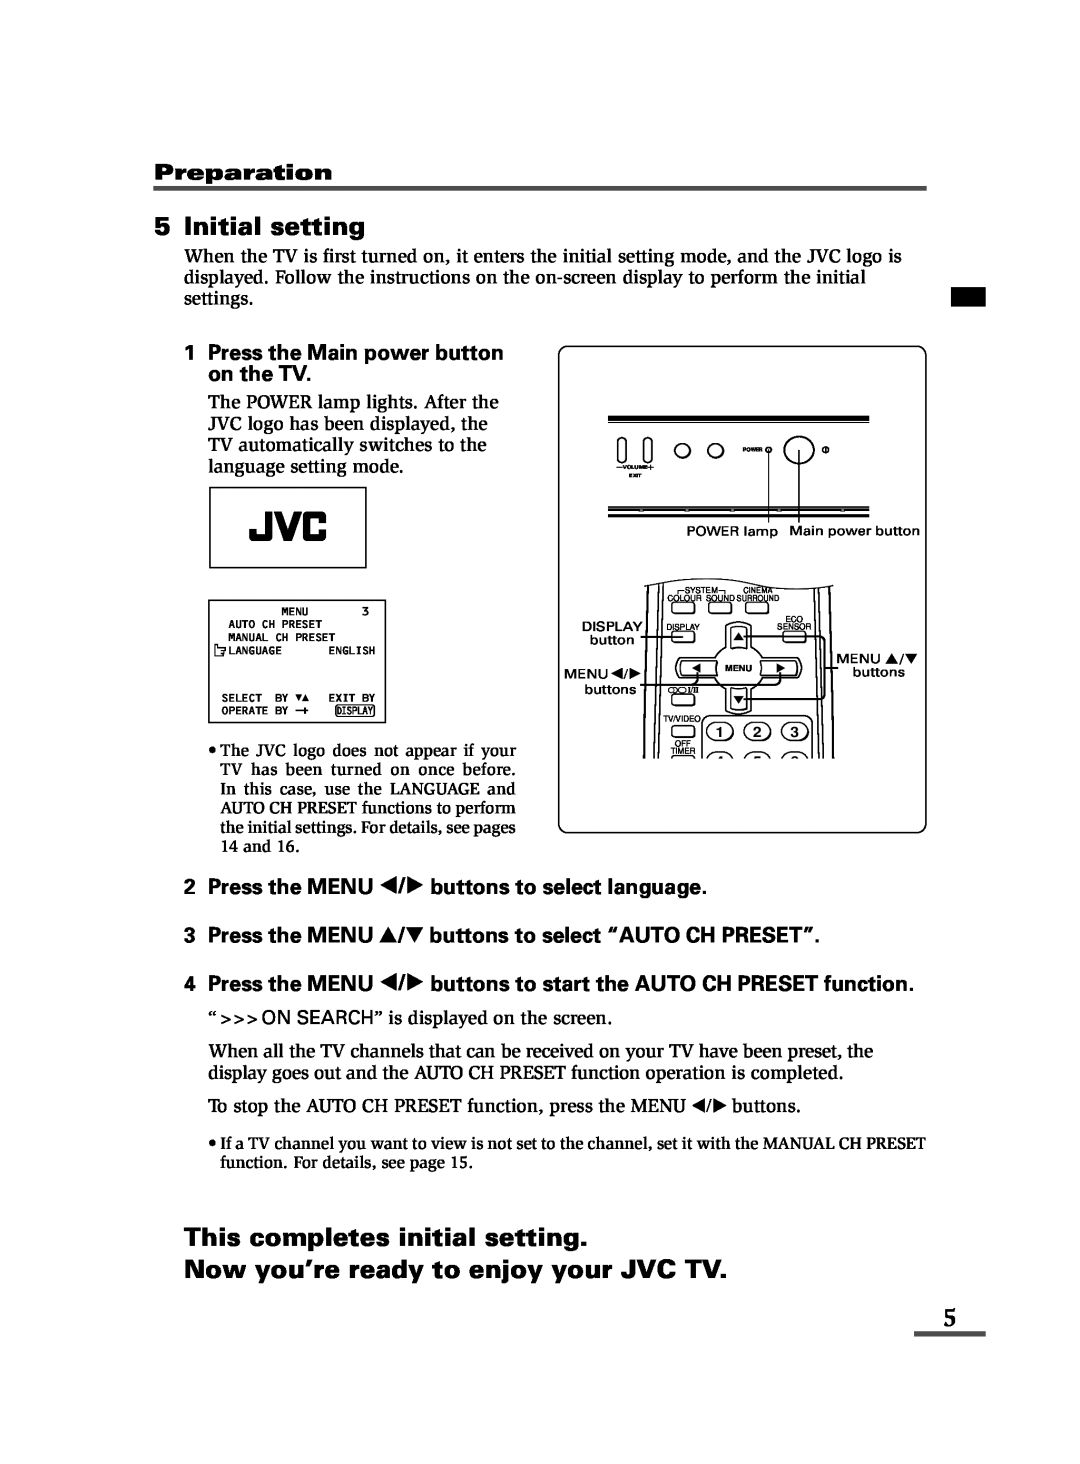 JVC specifications Initial setting, This completes initial setting Now you’re ready to enjoy your JVC TV, Preparation 